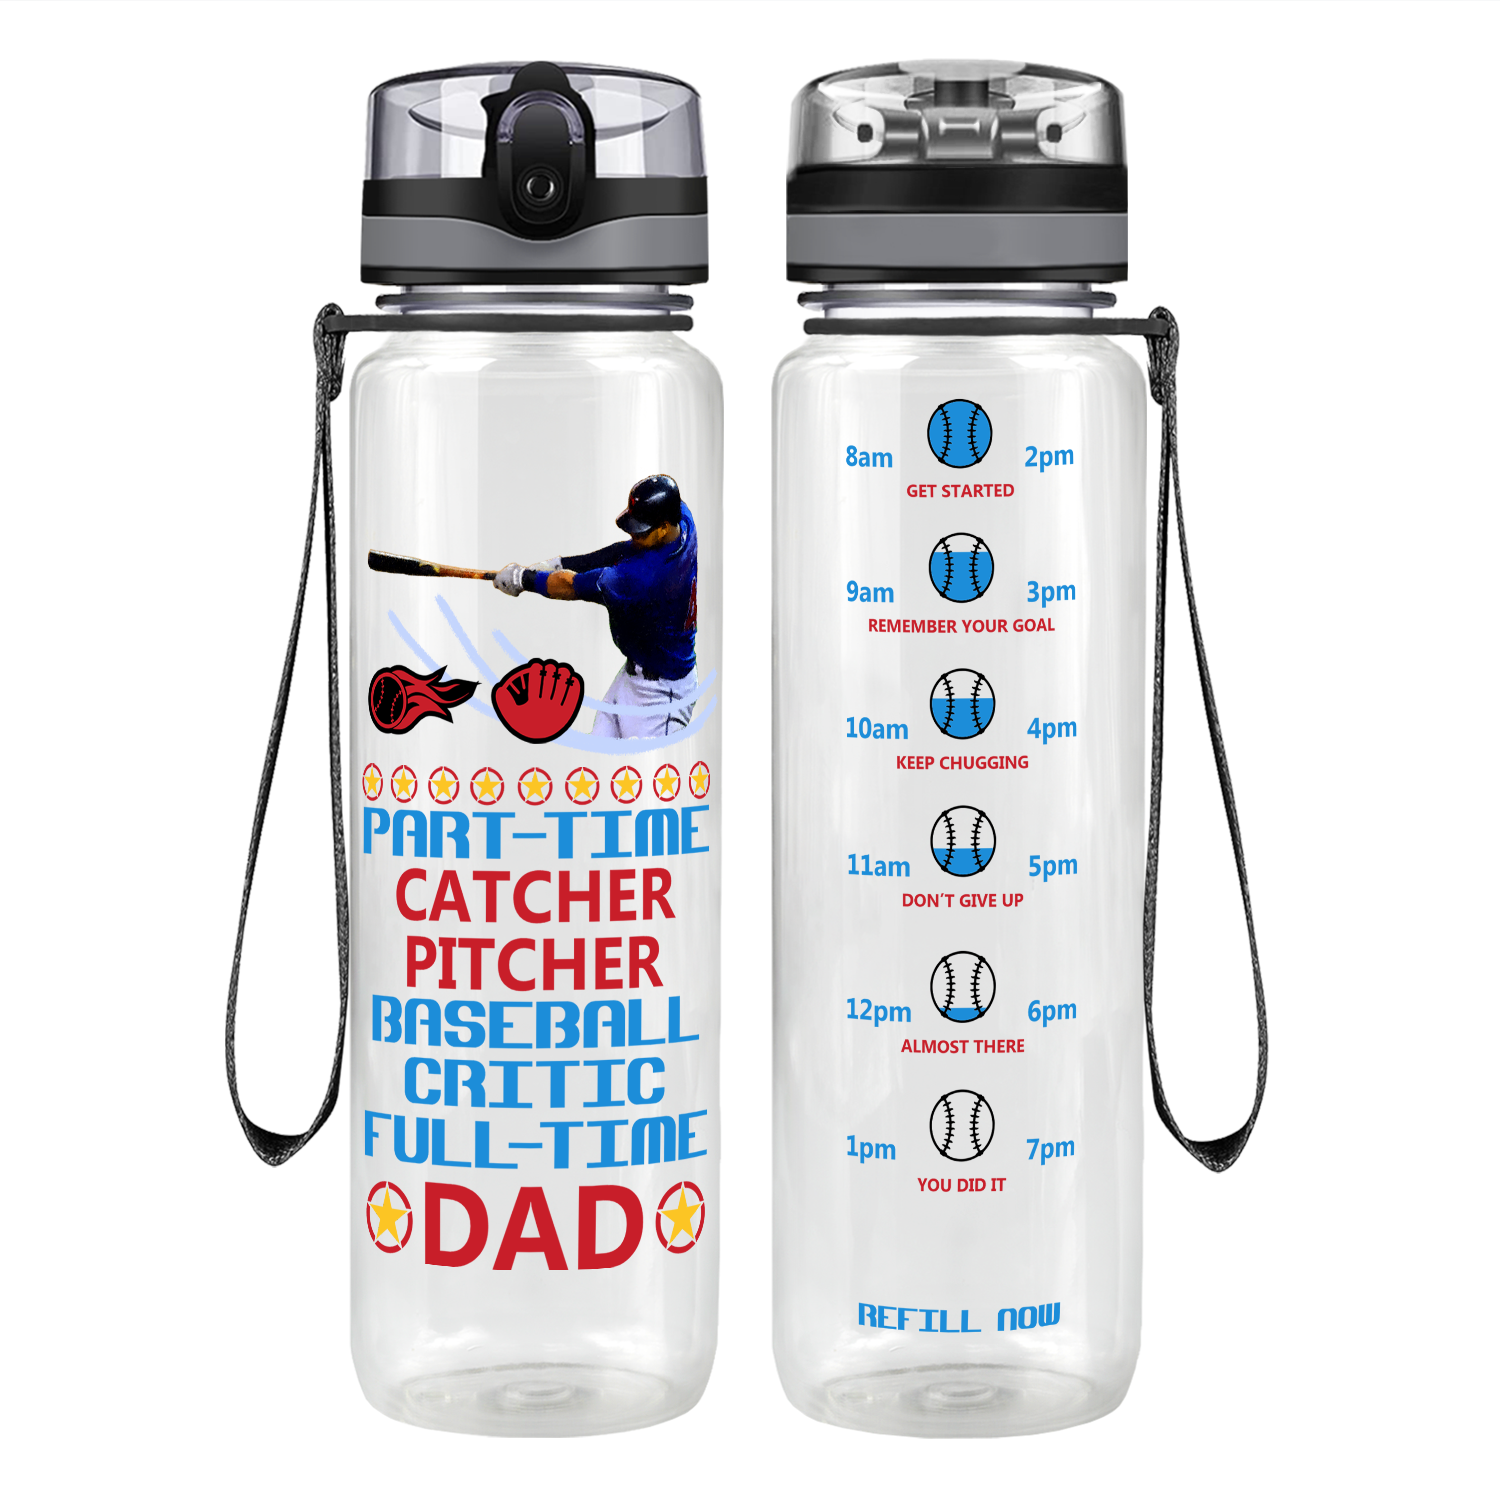 Part-Time Catcher Pitcher Full Time Dad on 32 oz Motivational Tracking Water Bottle